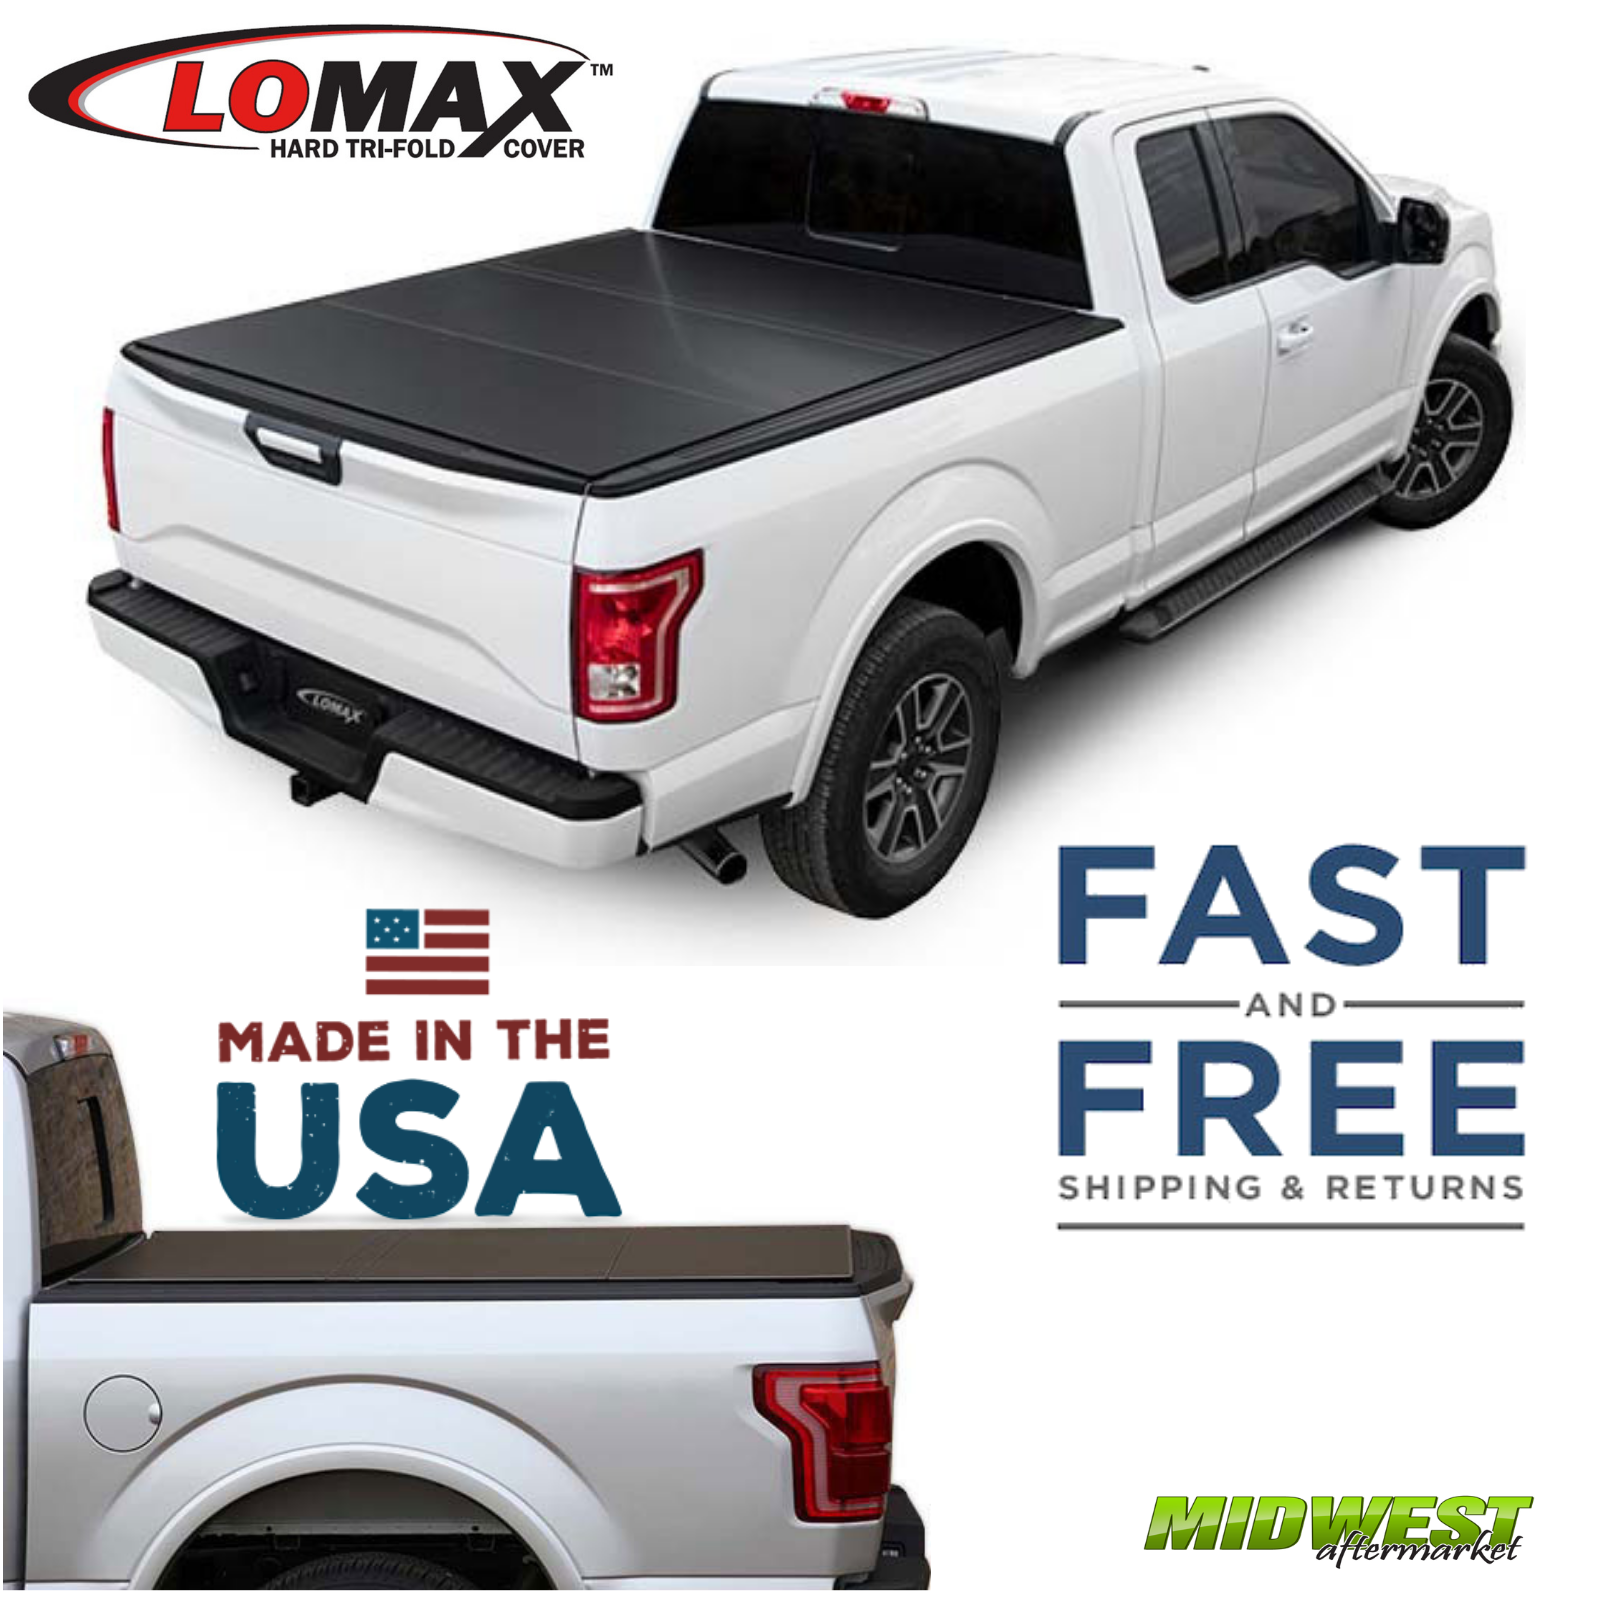 4XBEAM Hard Tri-Fold Truck Bed Tonneau Cover Fits 2009-2018 Dodge Ram 1500 2500 3500 Without Ram Box|5 Years Warranty 5.7 Bed